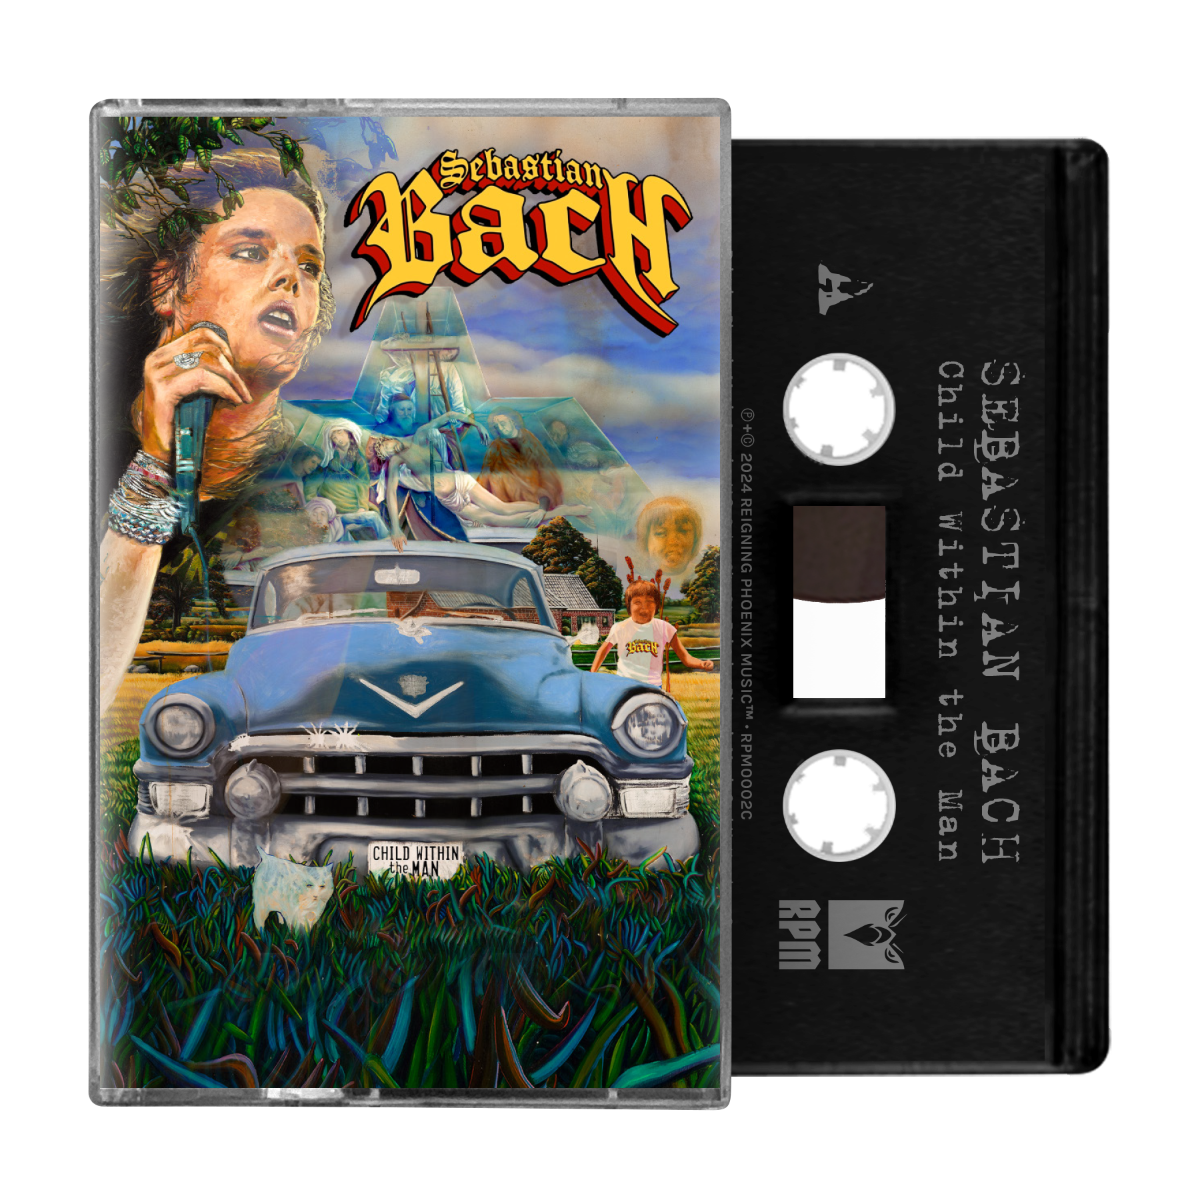 Sebastian Bach | Child Within The Man (Indie Exclusive) | Cassette